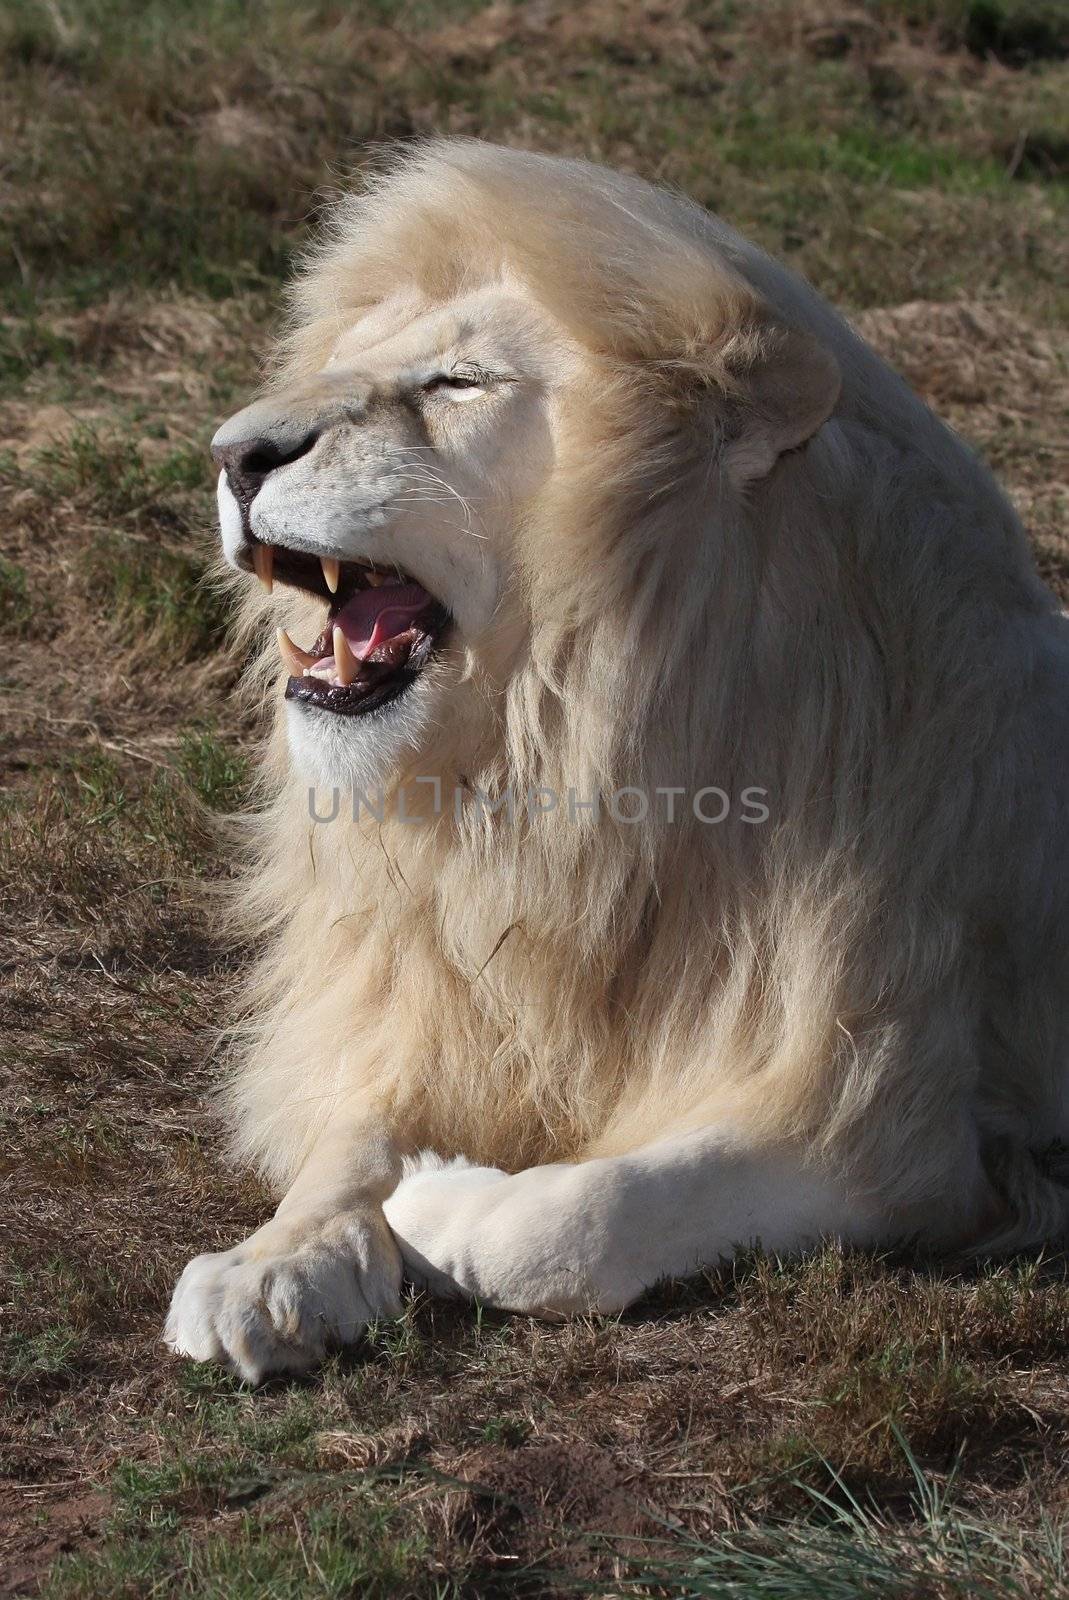 Huge male white lion with a big shaggy mane and open mouth